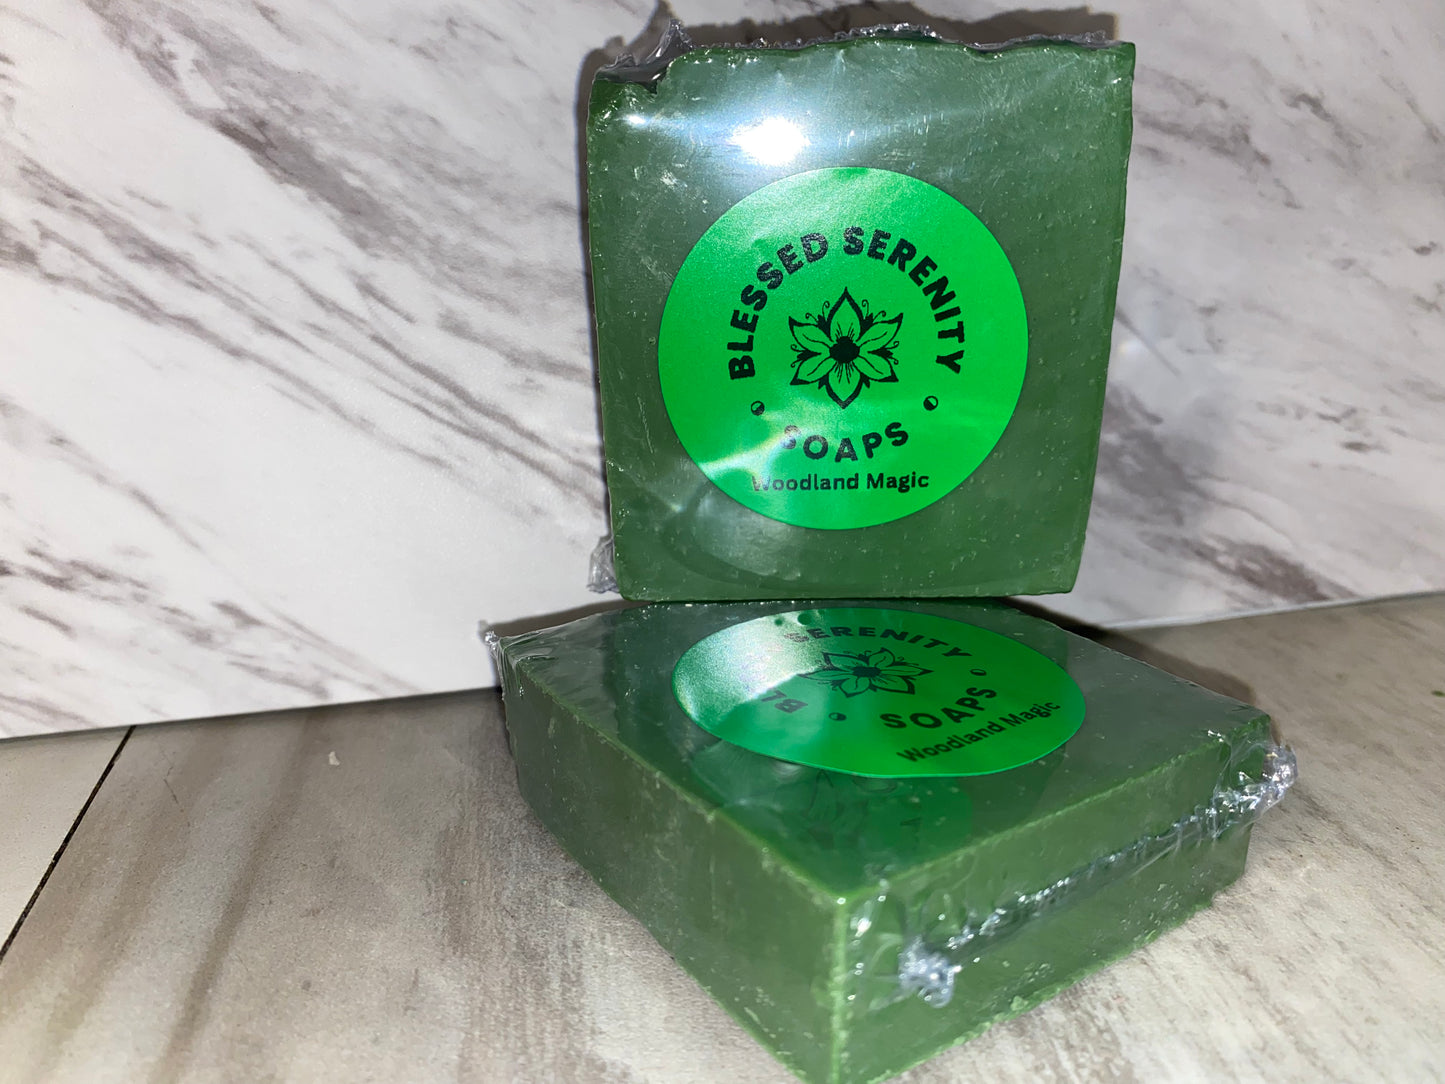 Forest green bar soap with green labels saying blessed Serenity Soaps woodland magic 